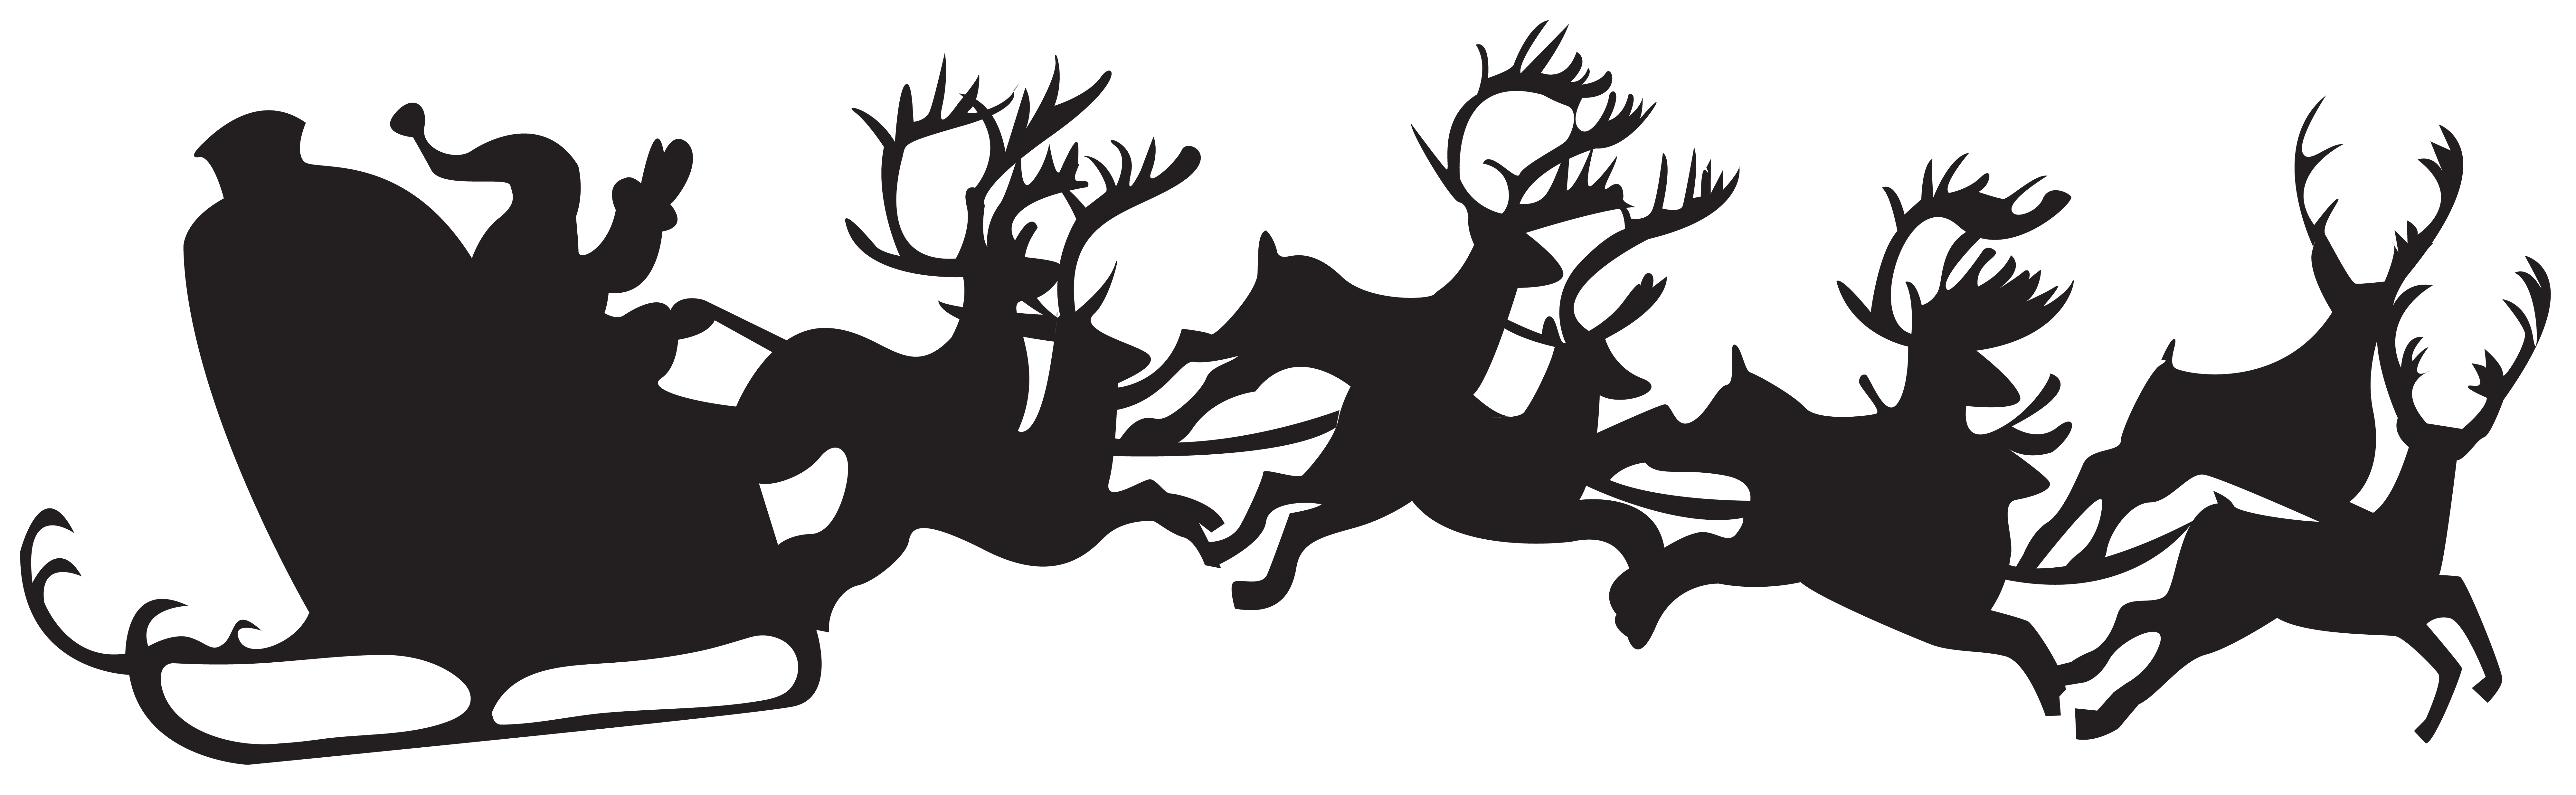 Christmas silhouette santa claus. Holiday clipart deer